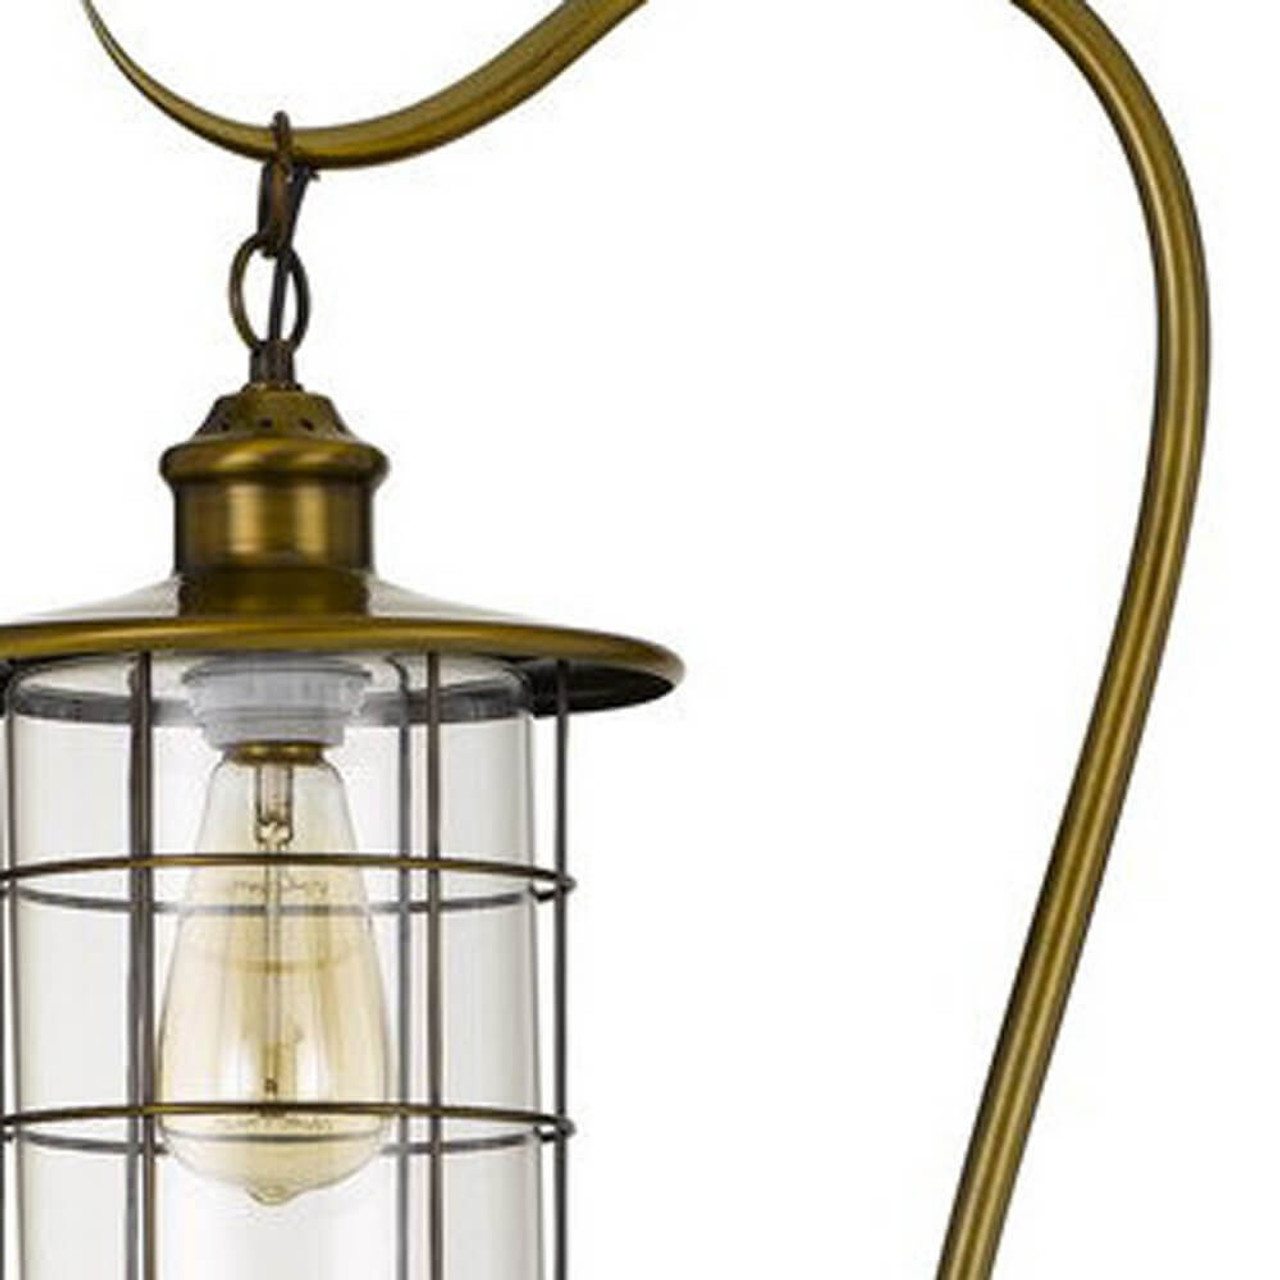 60" Brass Traditional Shaped Floor Lamp With Bronze Transparent Glass Drum Shade